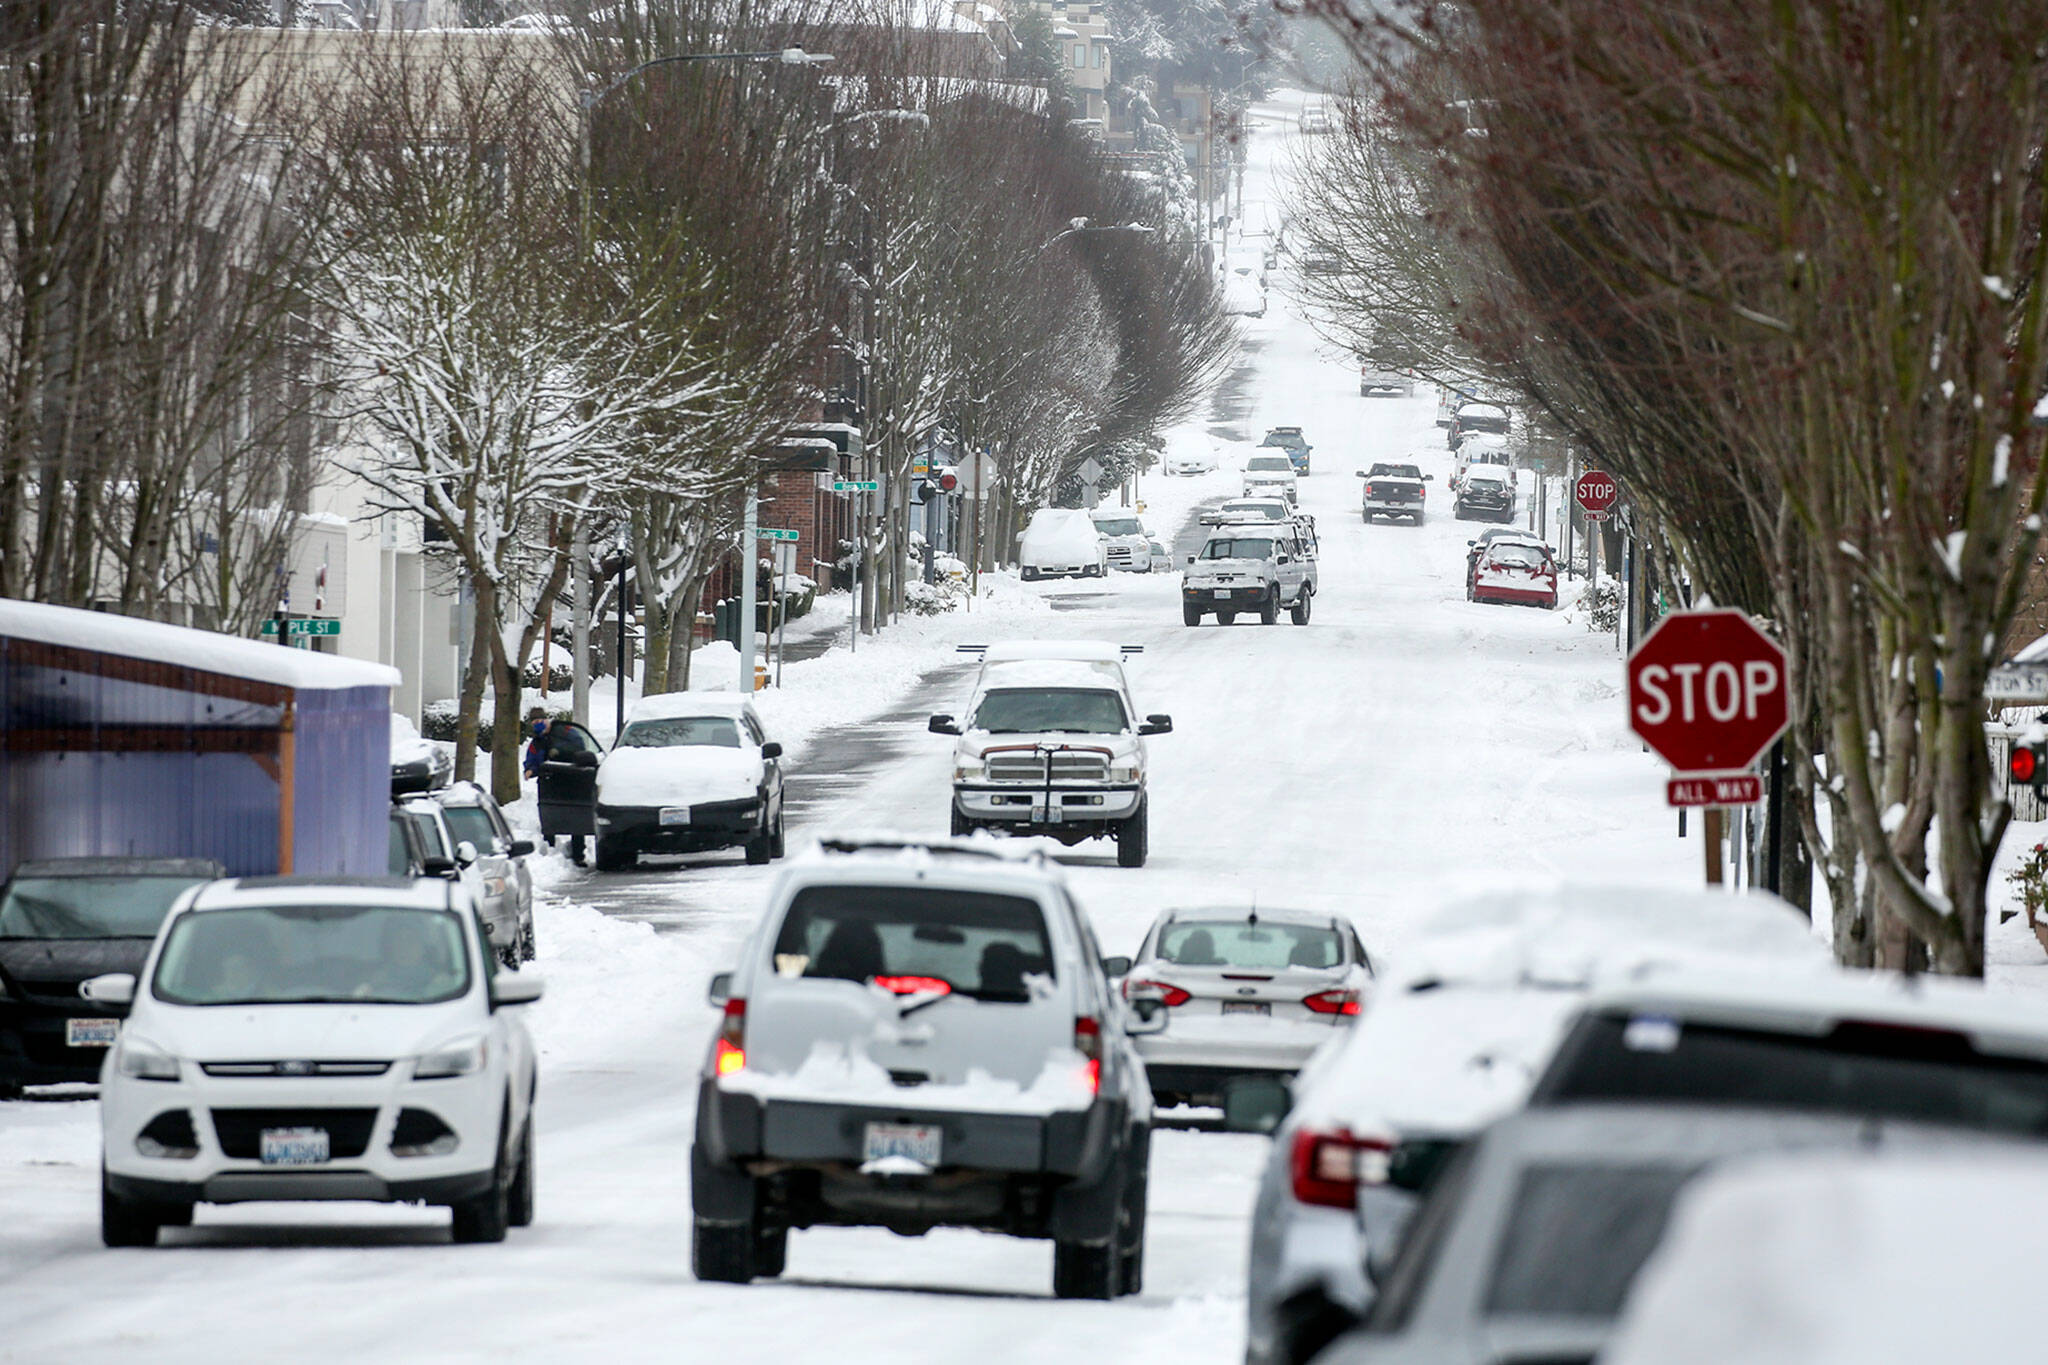 Snow is in the forecast for Snohomish County with between 1 and 4 inches likely by Wednesday from Arlington to Lynnwood. (Kevin Clark / Herald file)